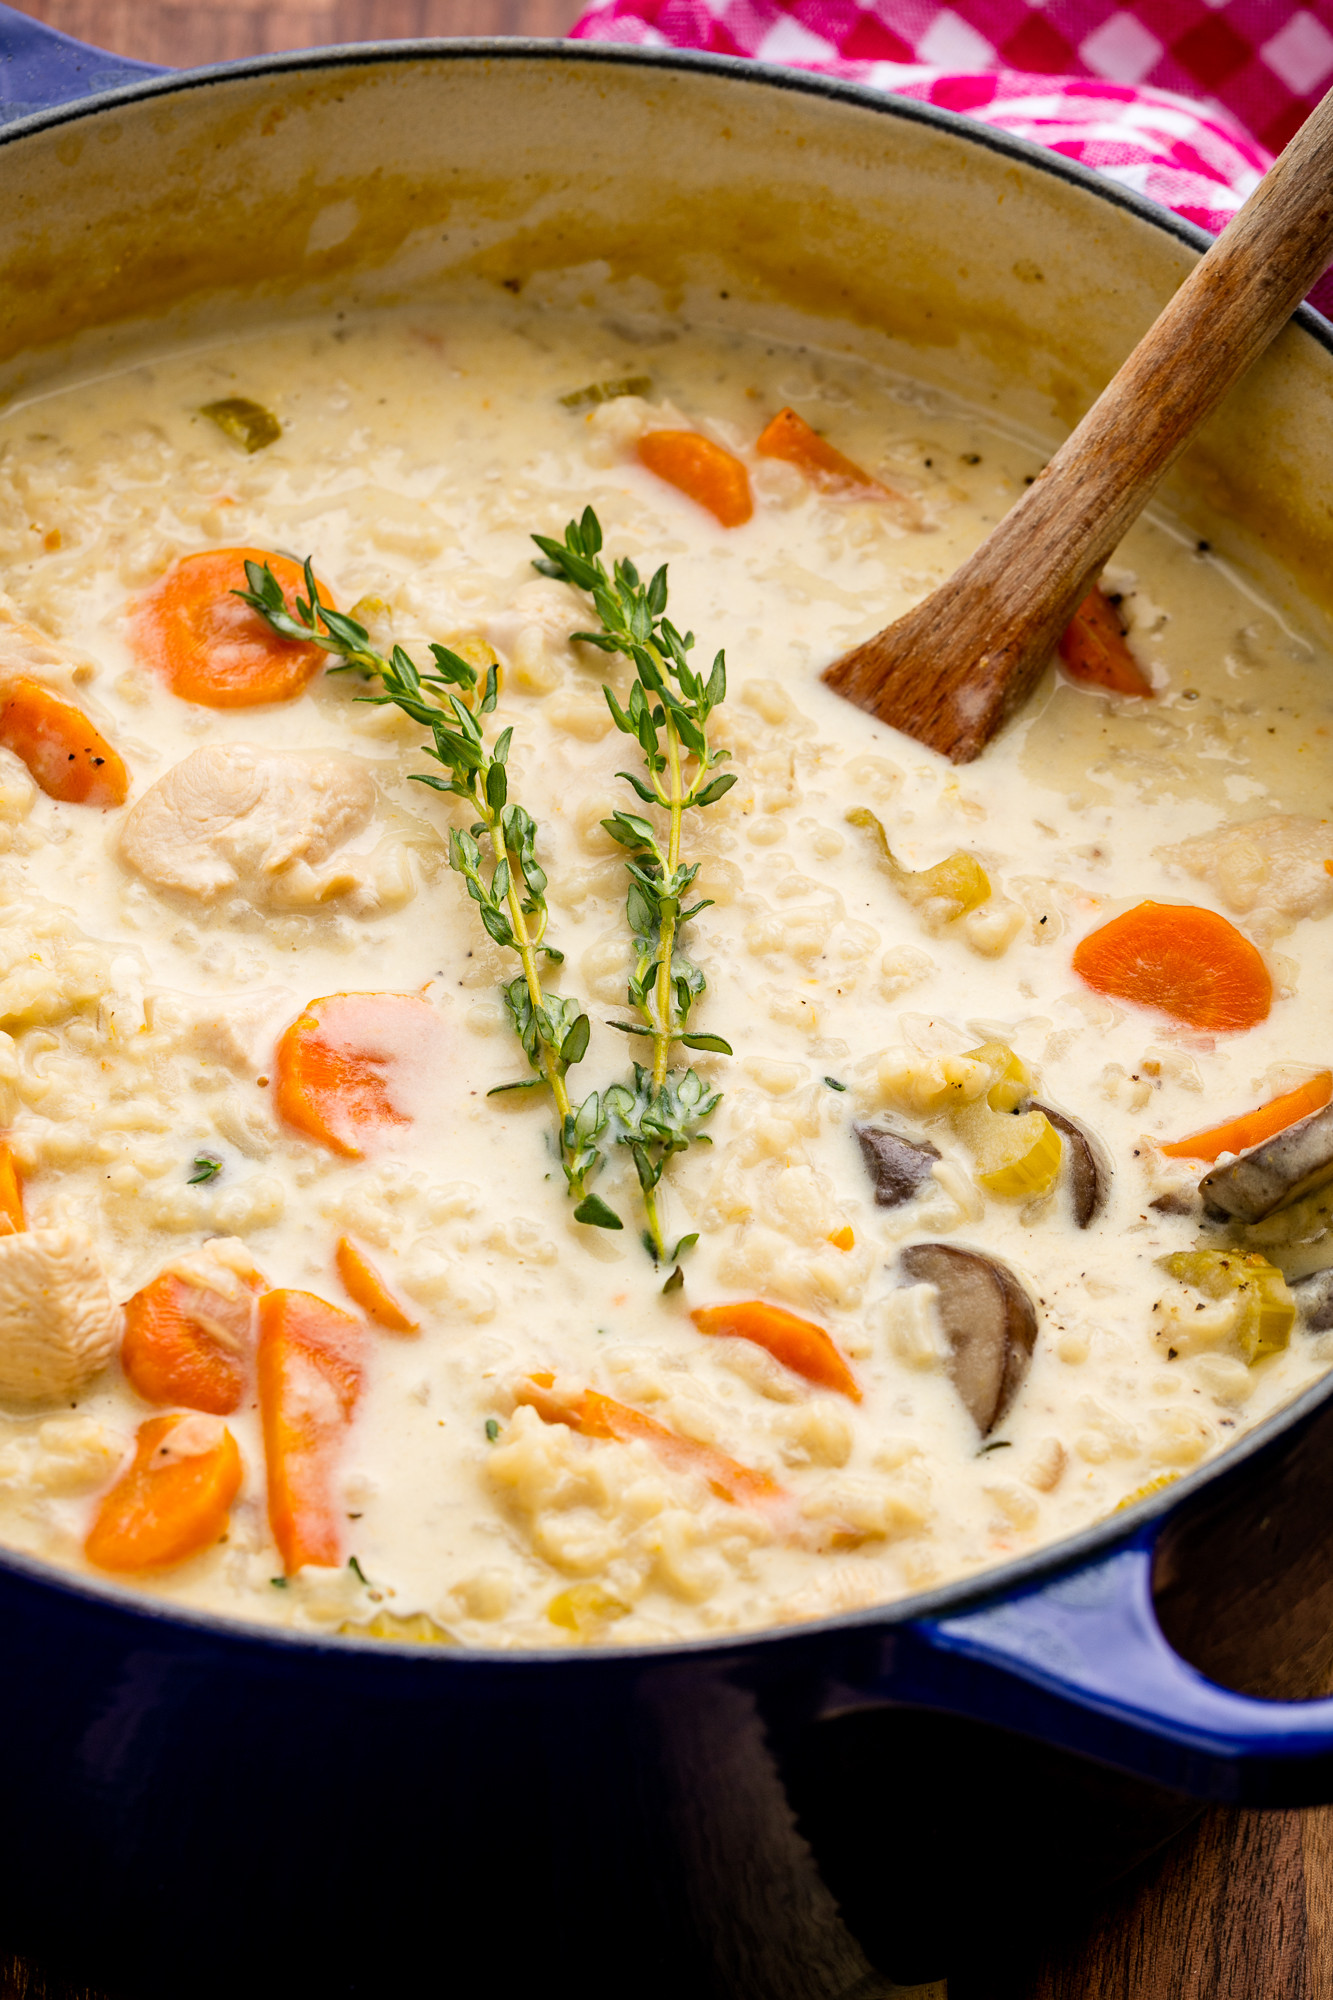 Recipes With Chicken And Cream Of Mushroom Soup
 Creamy Chicken and Mushroom Soup Recipe—Delish